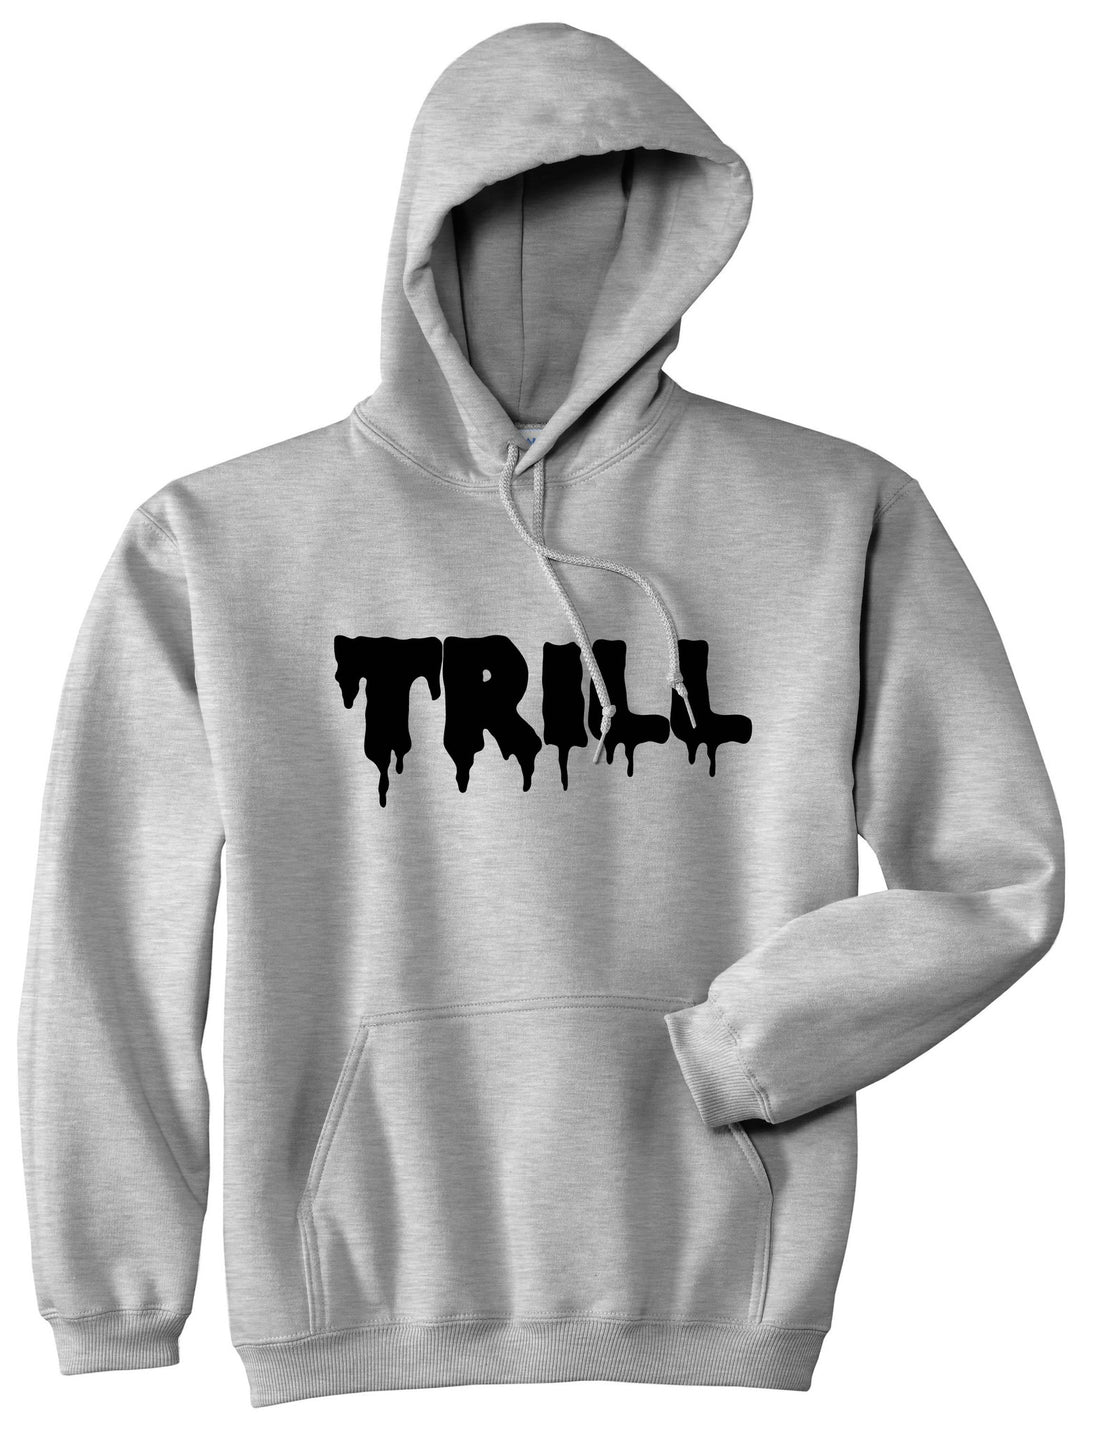 Trill Blood New York Bx Been Style Fashion Boys Kids Pullover Hoodie Hoody In Grey by Kings Of NY